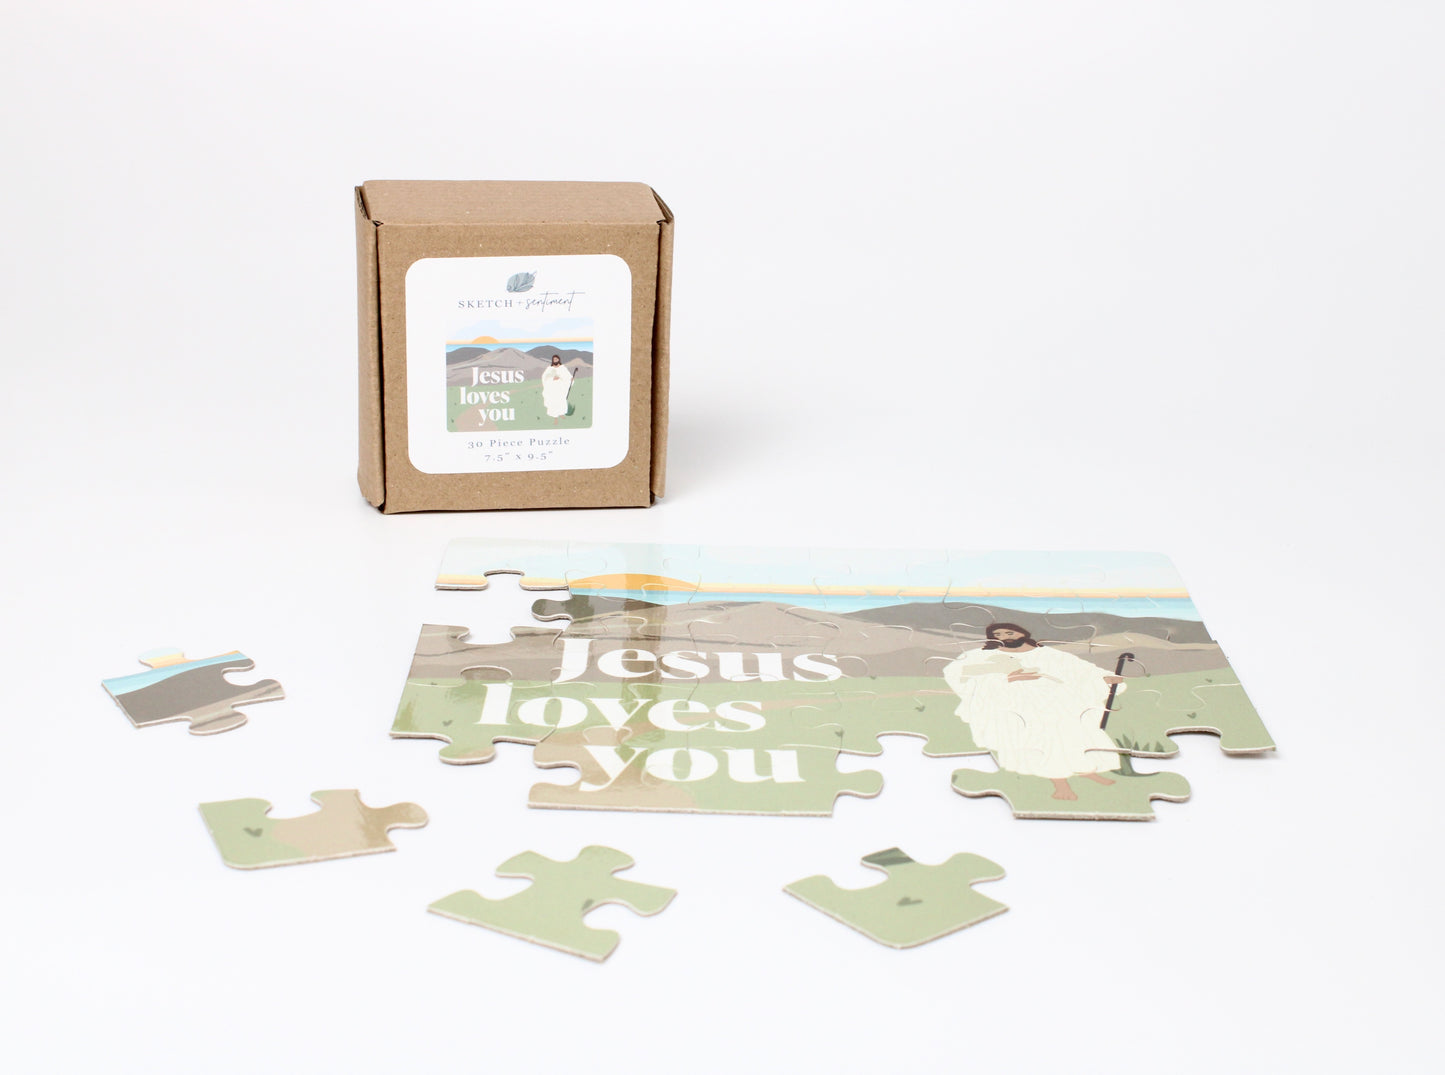 jesus loves you christian puzzle